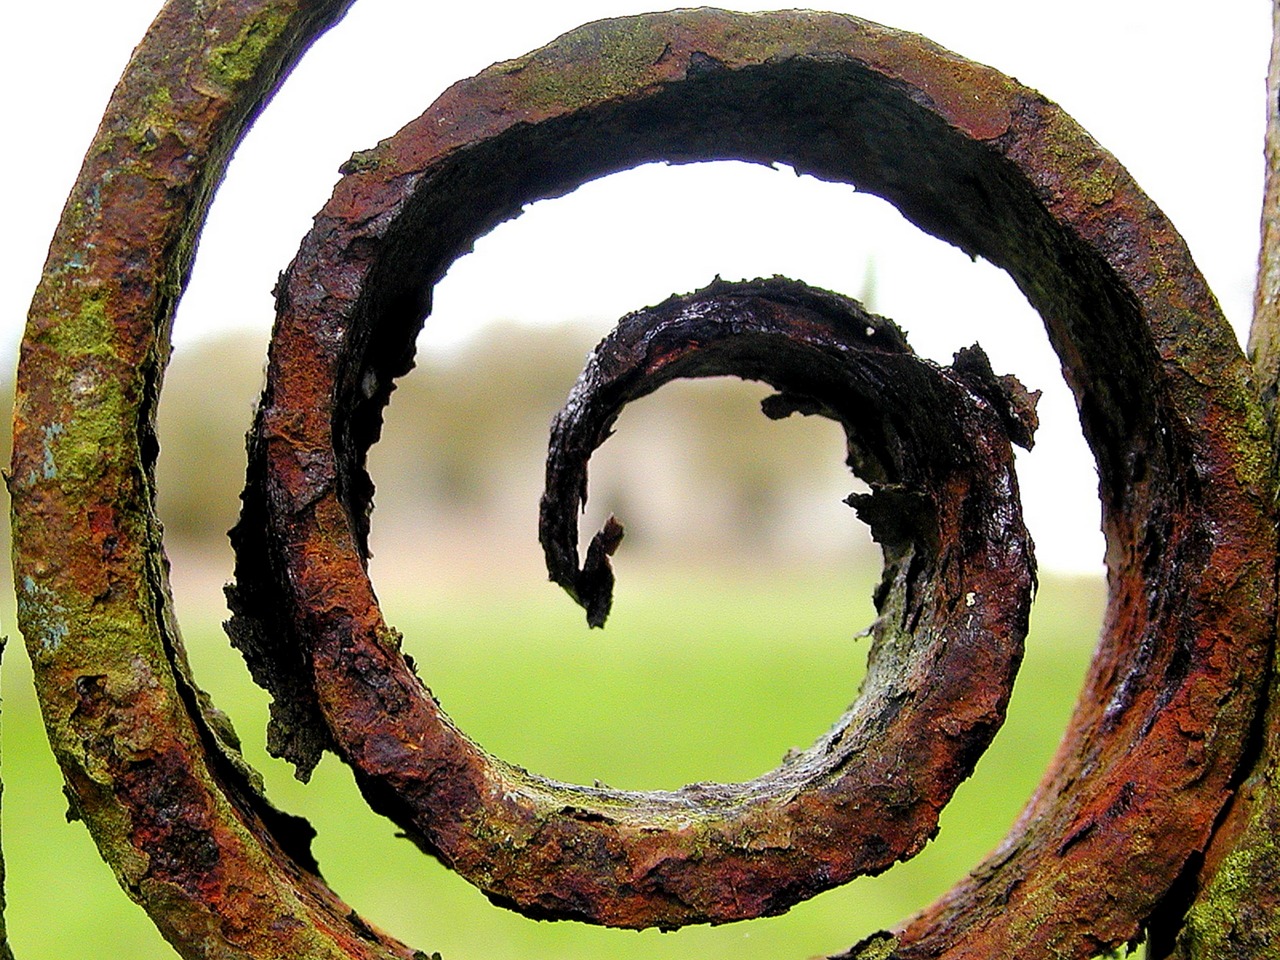 a rusted iron fence with a green field in the background, a macro photograph, by Dave Allsop, flickr, land art, pulled into the spiral vortex, sculpture!!, ancient”, whirlpool